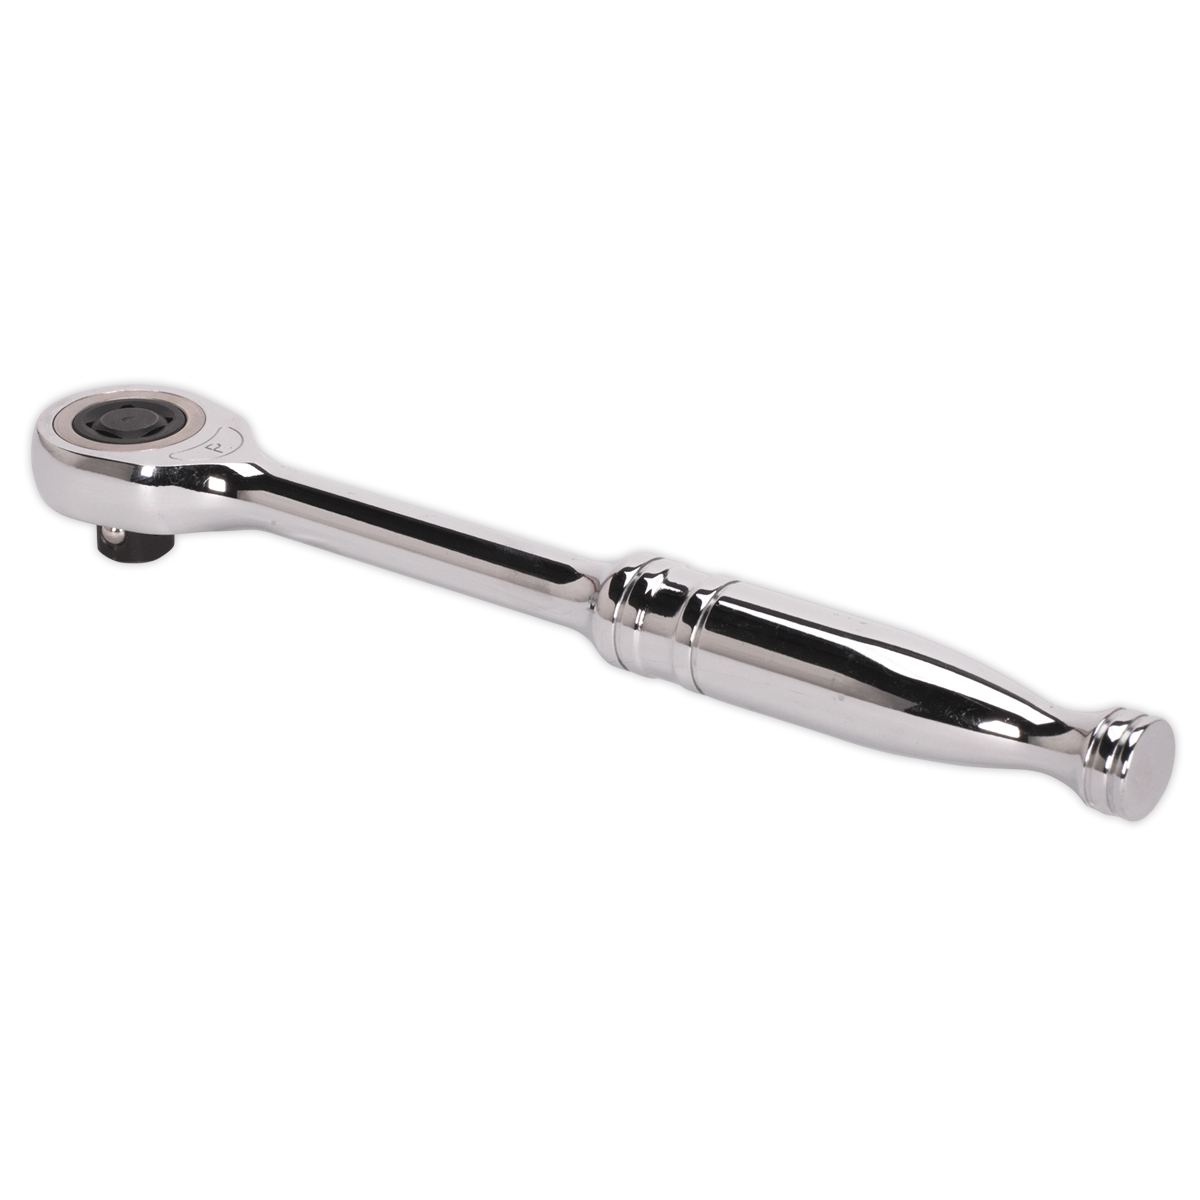 Sealey Gearless Ratchet Wrench 3/8"Sq Drive - Push-Through Reverse